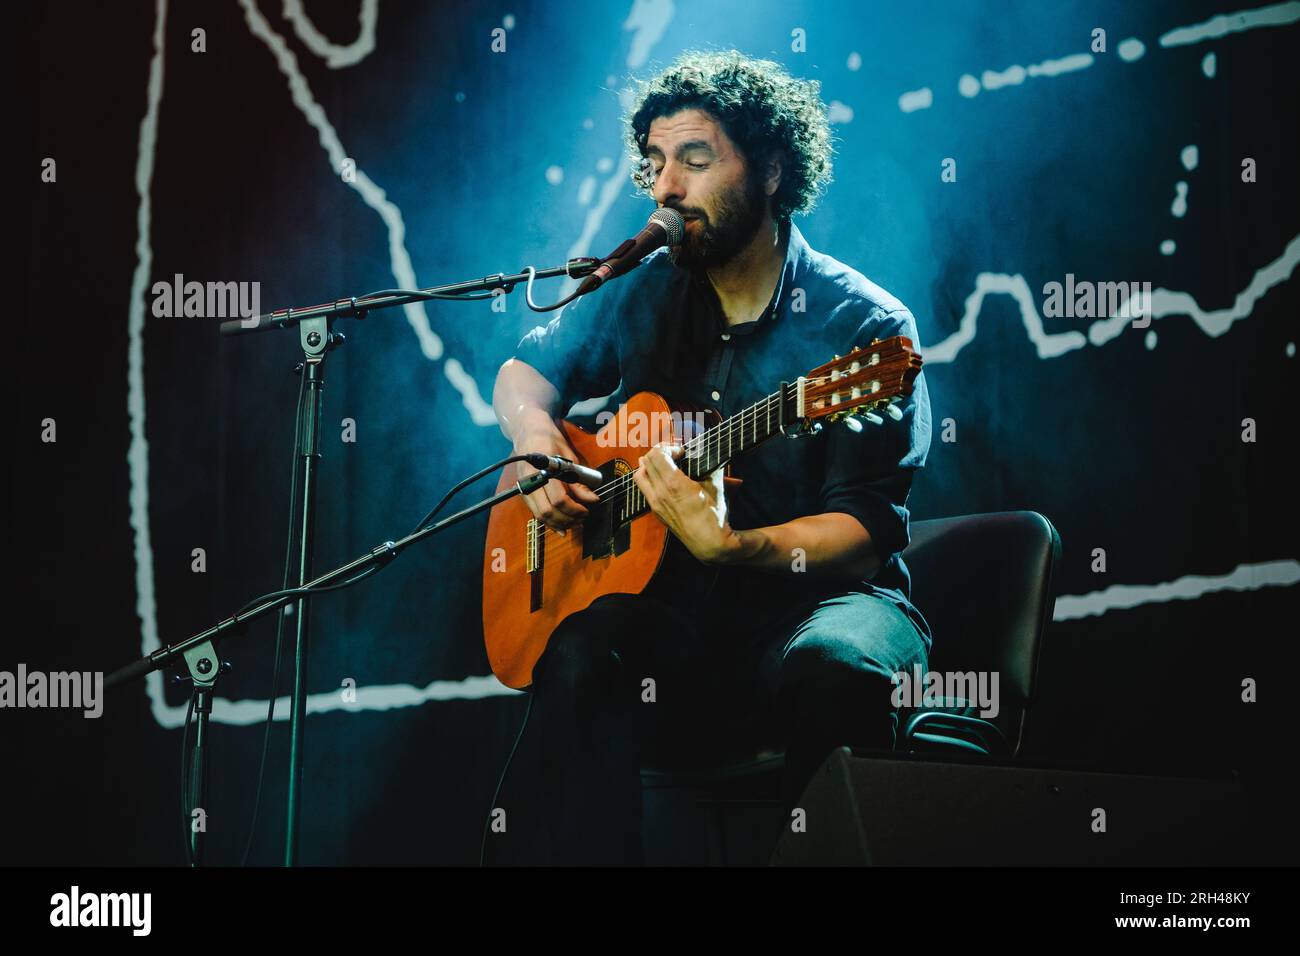 Gothenburg, Sweden. 12th, August 2023. The Swedish singer, songwriter and musician Jose Gonzales performs a live concert during the Swedish music festival Way Out West 2023 in Gothenburg. (Photo credit: Gonzales Photo - Tilman Jentzsch). Stock Photo